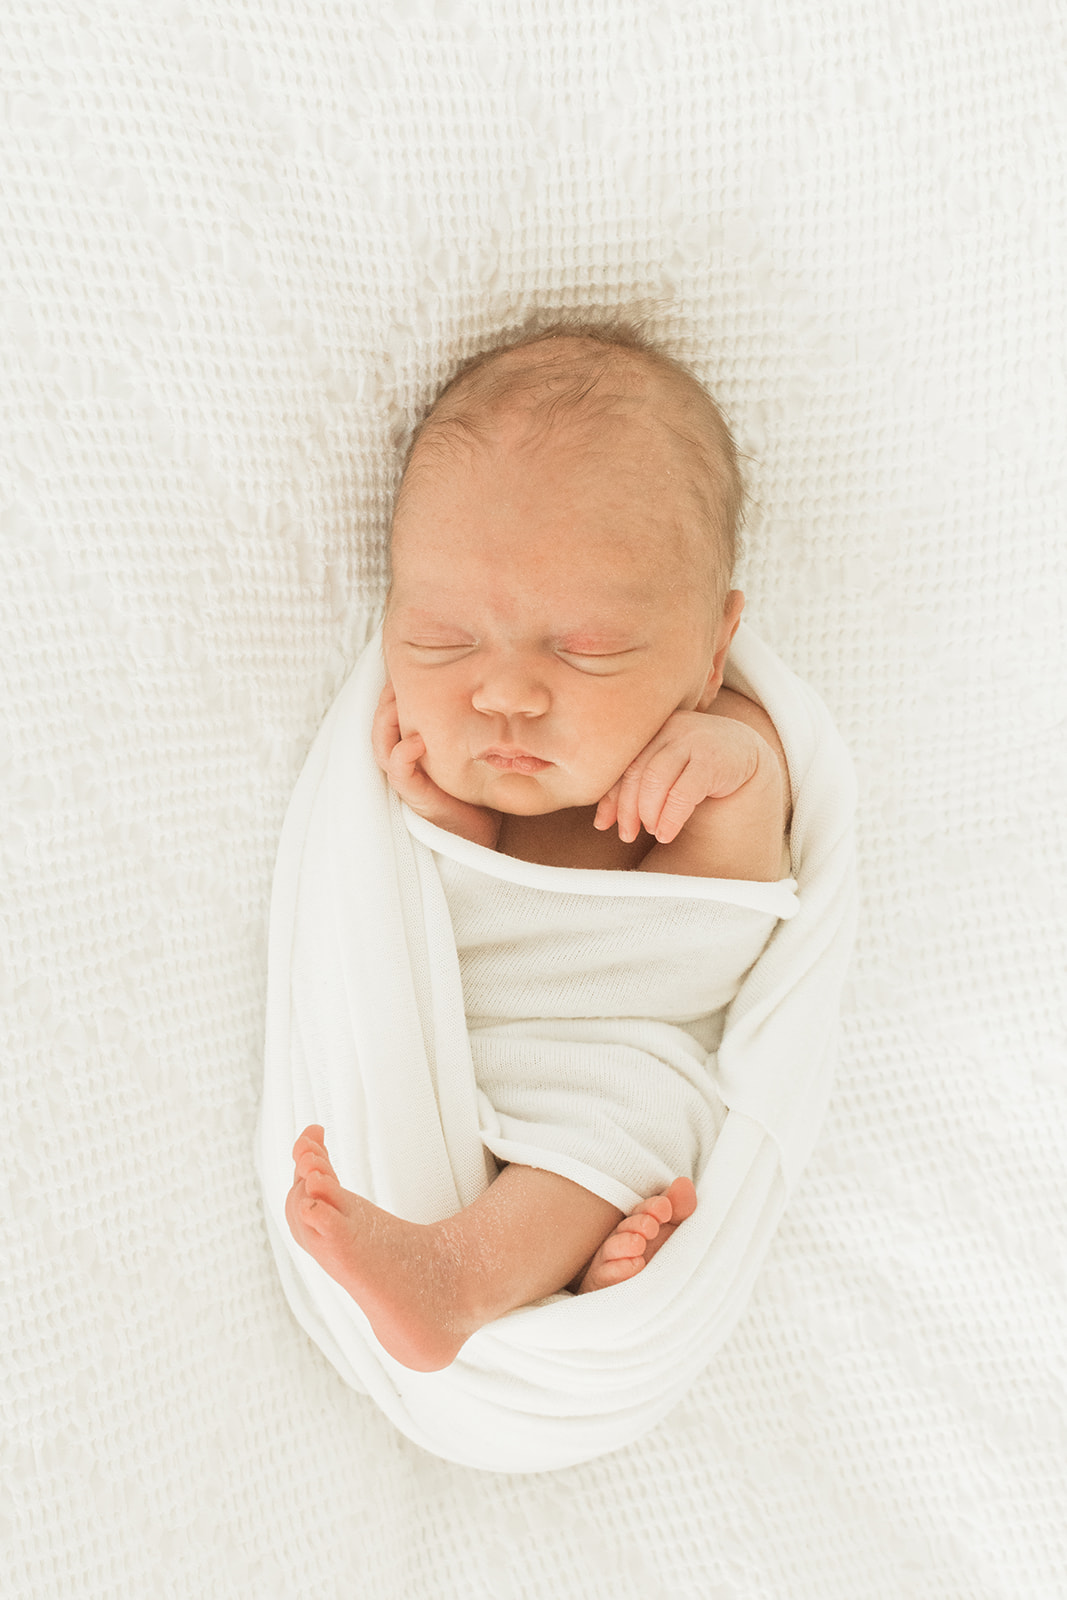 baby Charolette's newborn session in Nashville, Tennessee